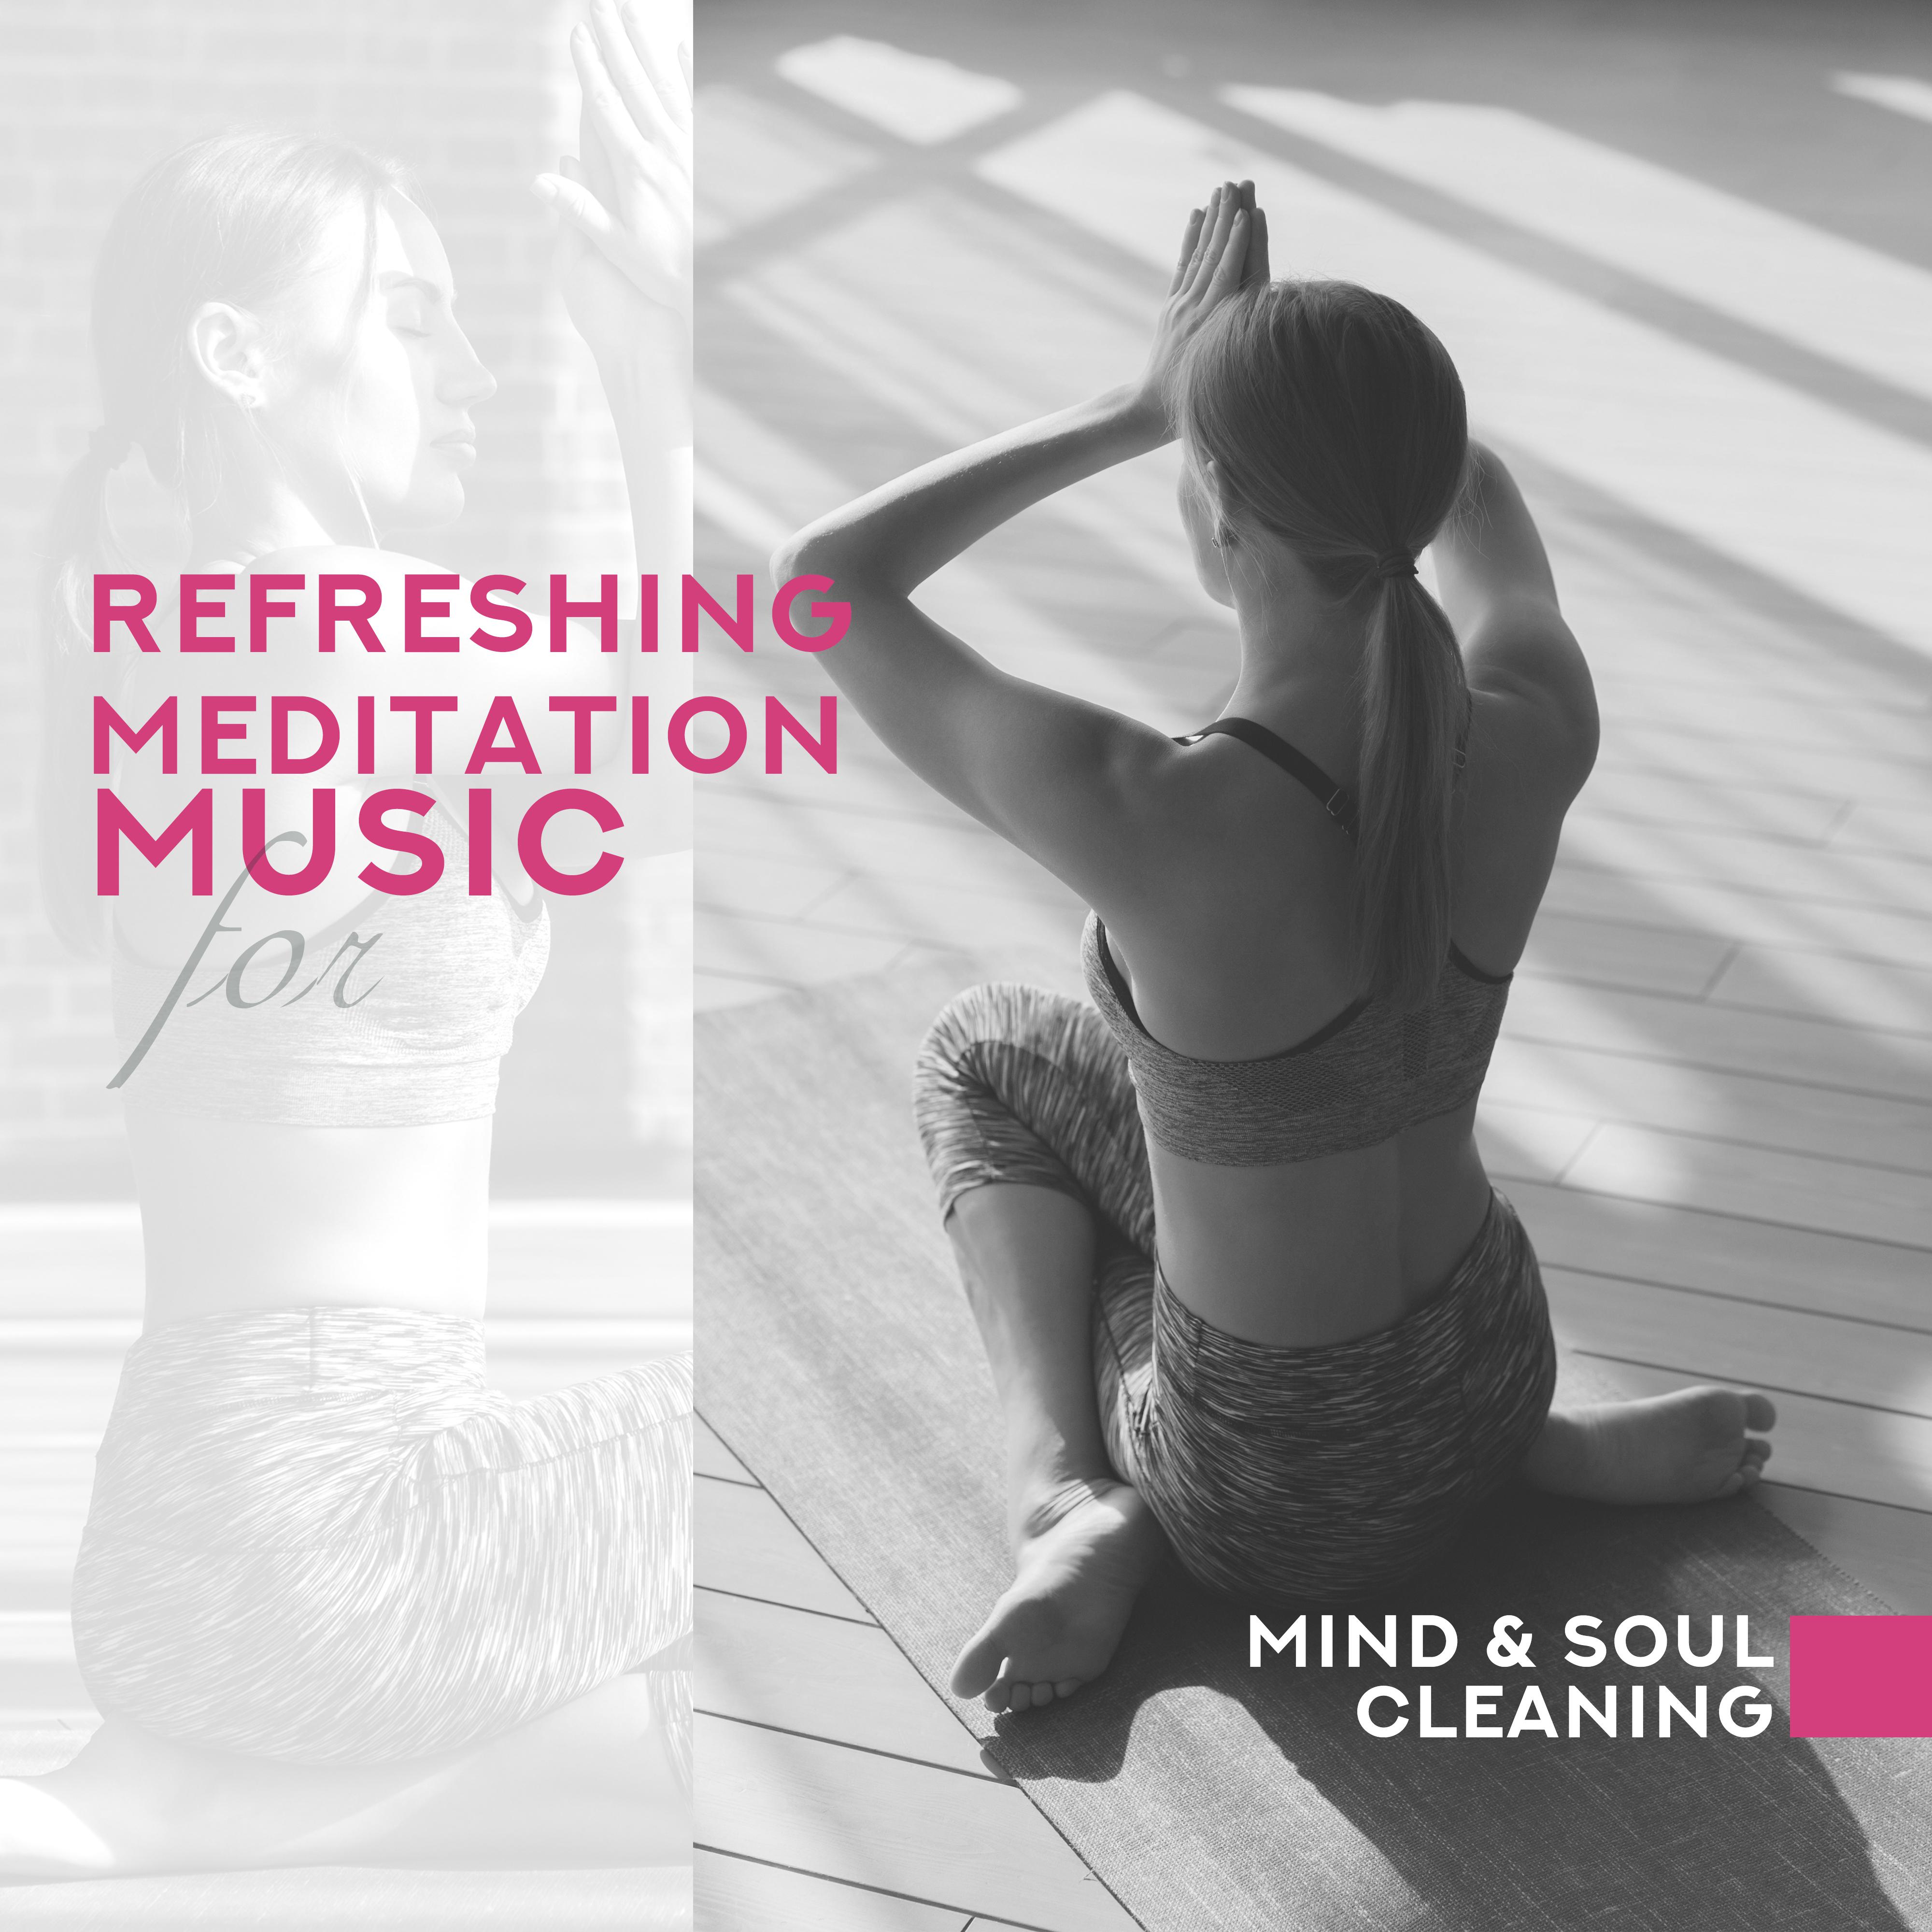 Refreshing Meditation Music for Mind & Soul Cleaning